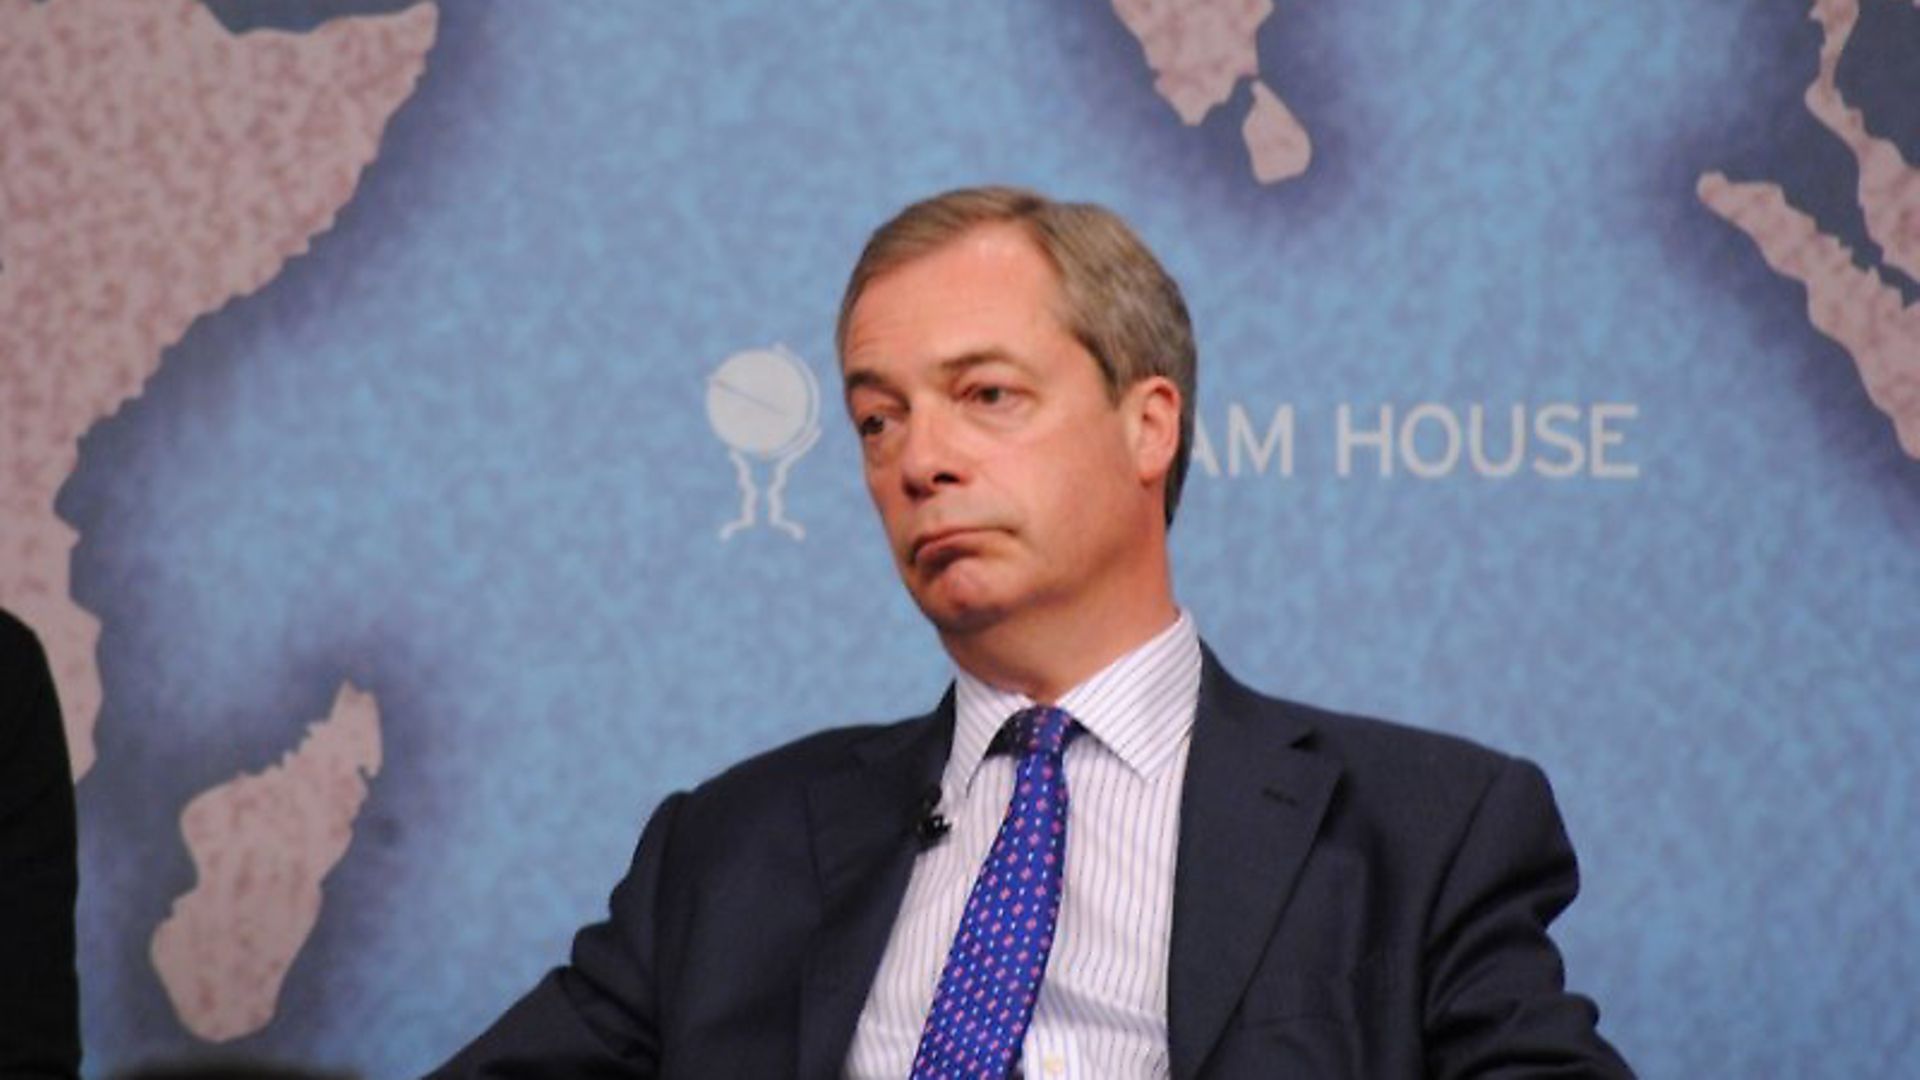 High life comes at a cost for Nigel Farage. Photo: Foter.com/CC BY - Credit: Photo credit: Chatham House, Lon